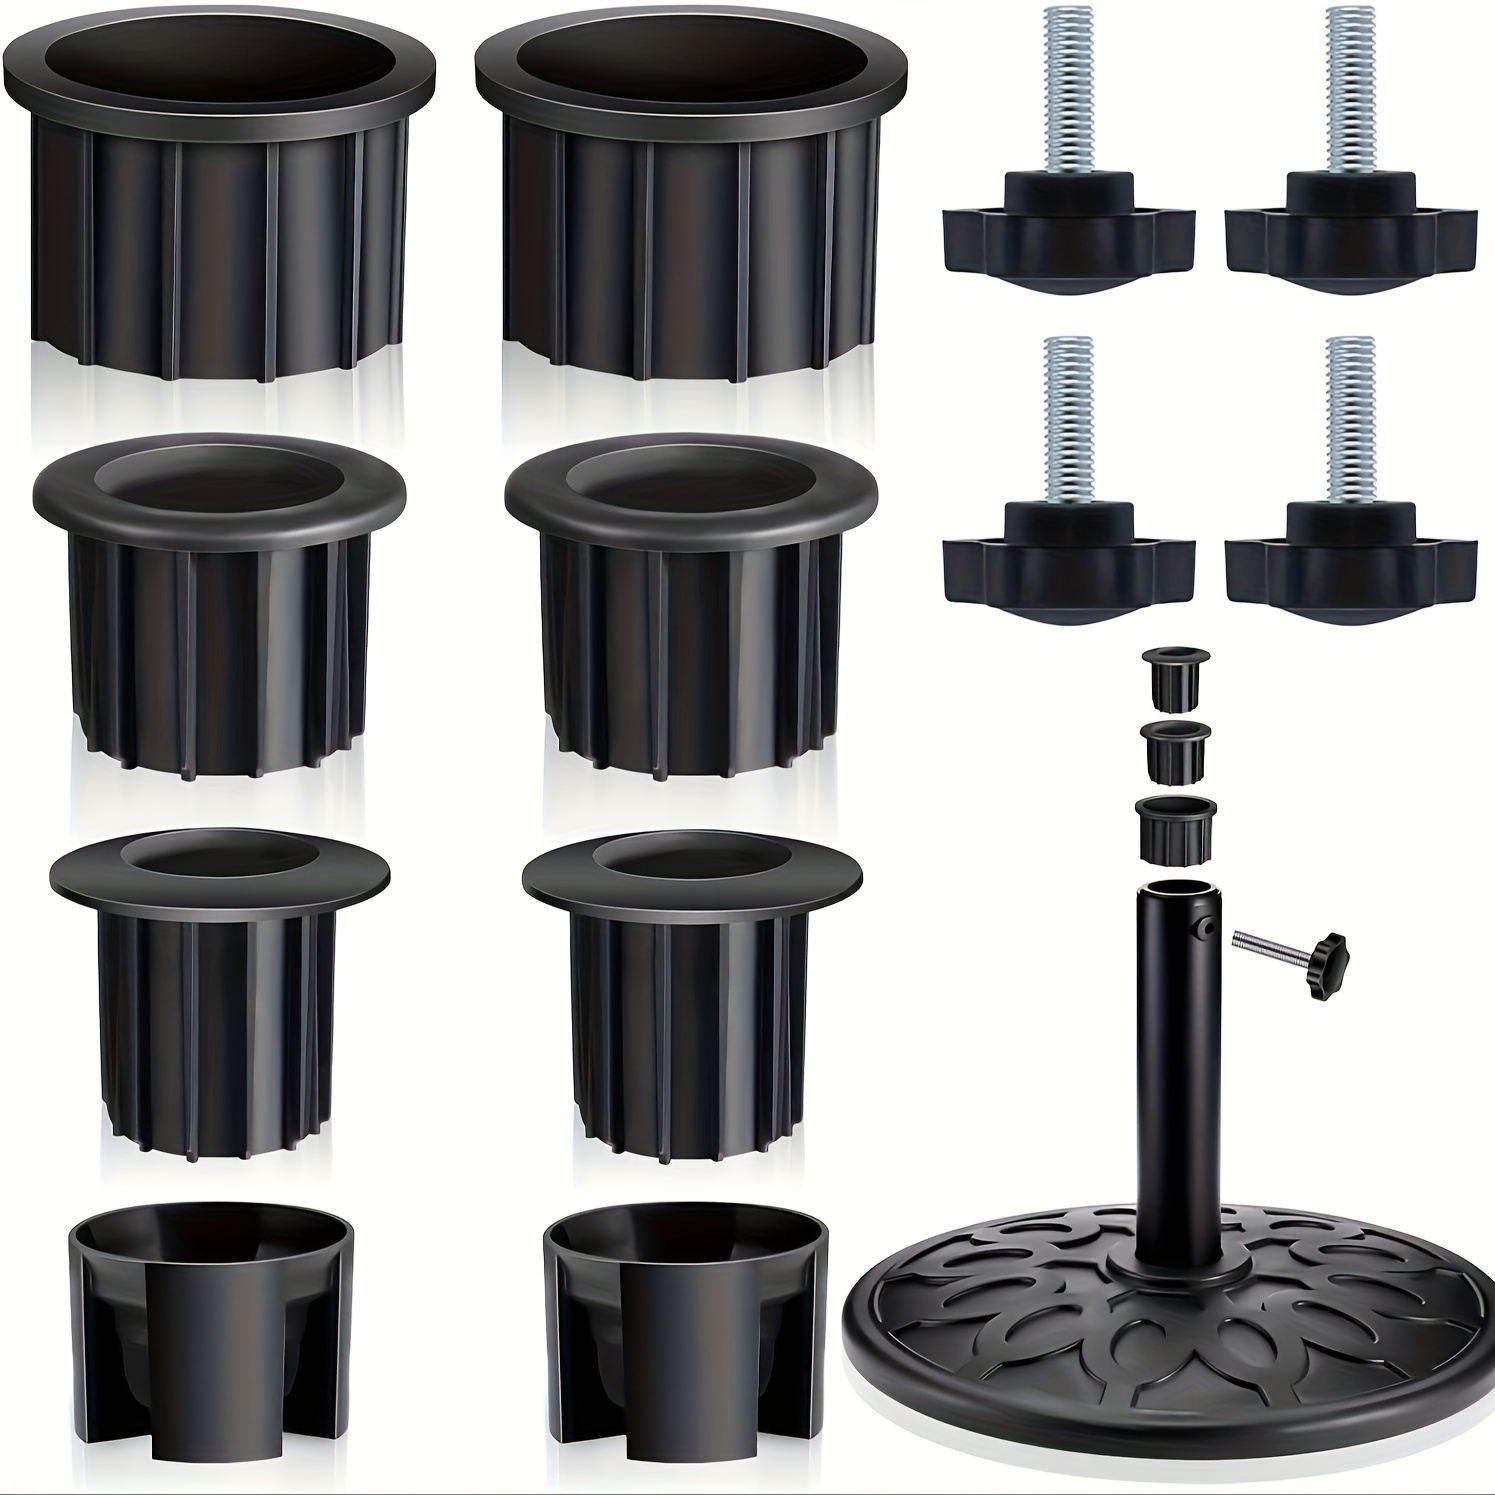 

A Twelve-piece Set Of Sunshade Tube Fixing Packages Including 2 28mm + 2 38mm + 2 48mm + 2 Oblique Mouth Covers + 4 Tight Spirals